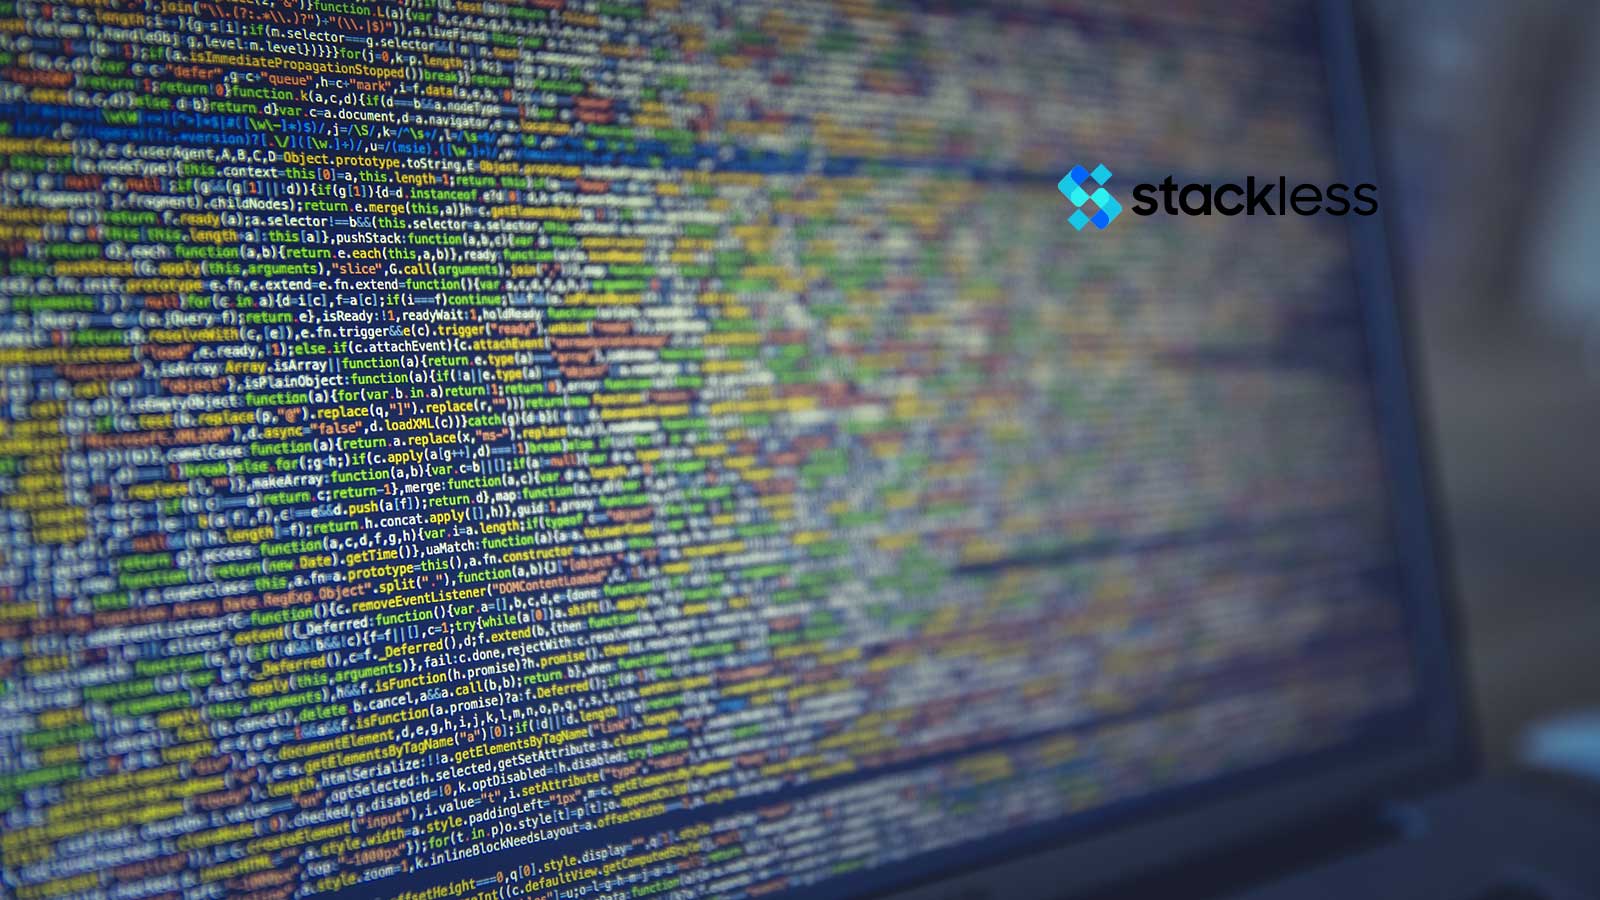 Stealth Startup Stackless Data Raises Seed Funding